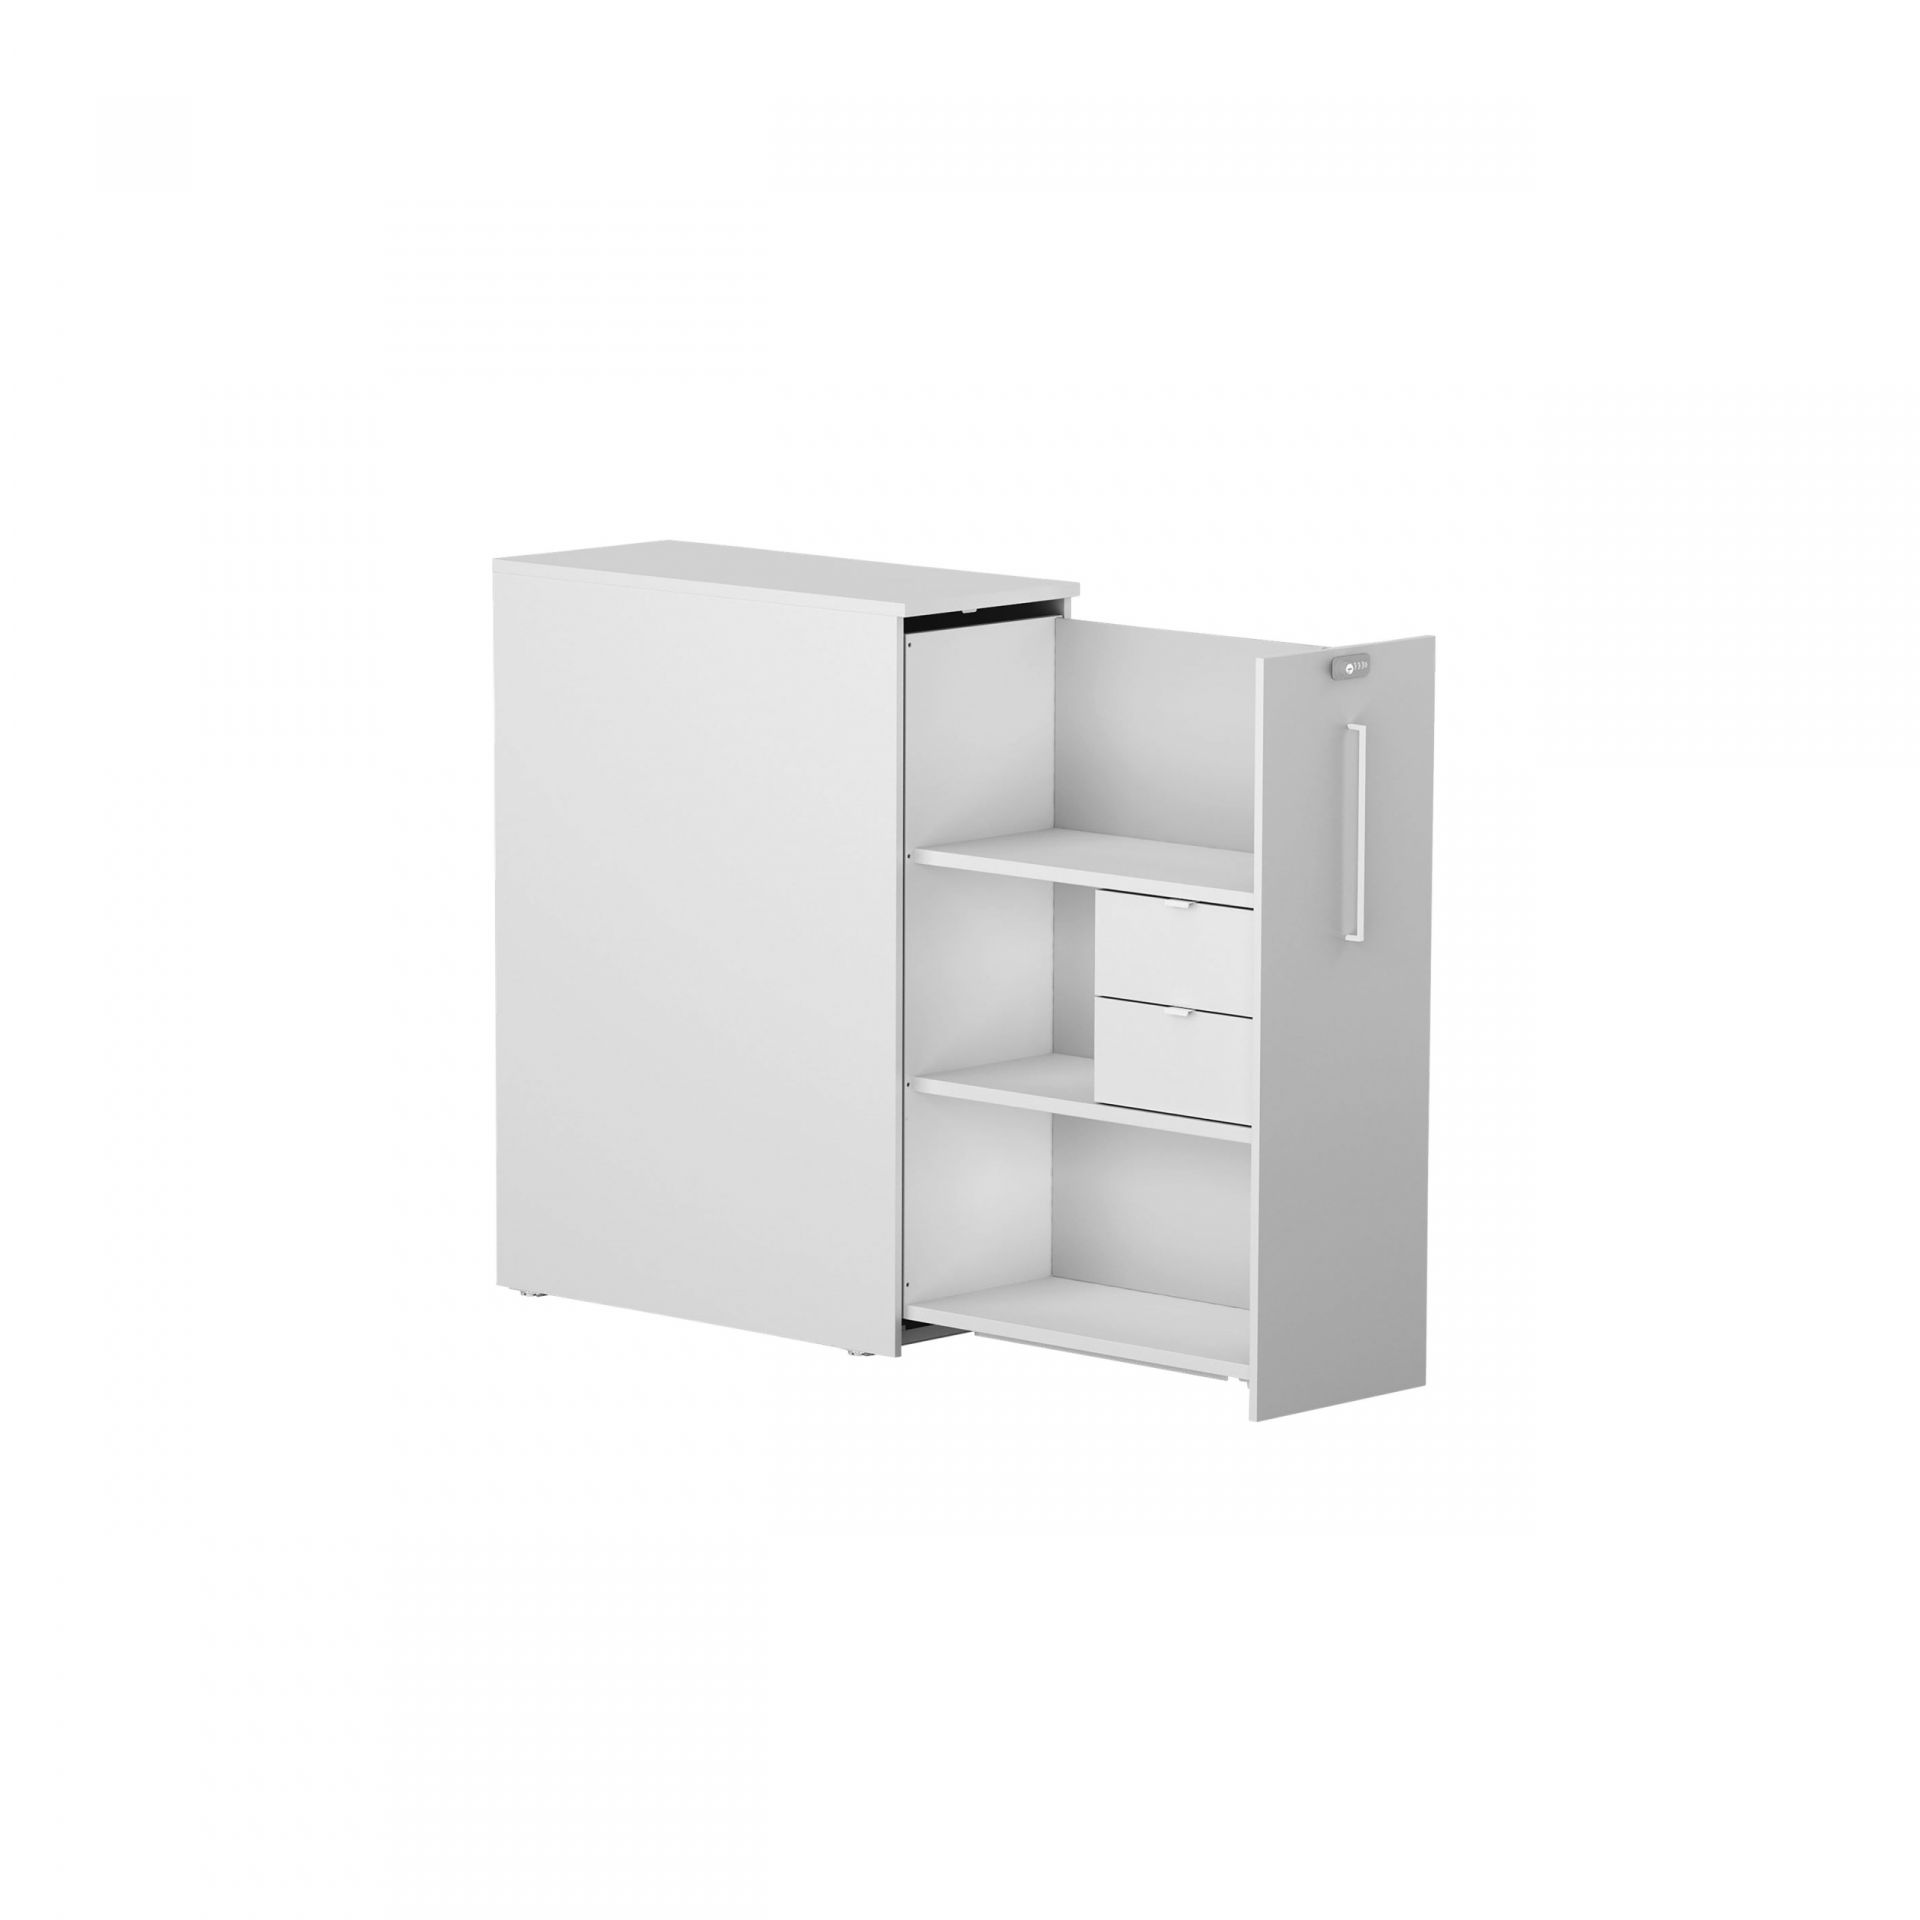 Hold Tower cabinet product image 2